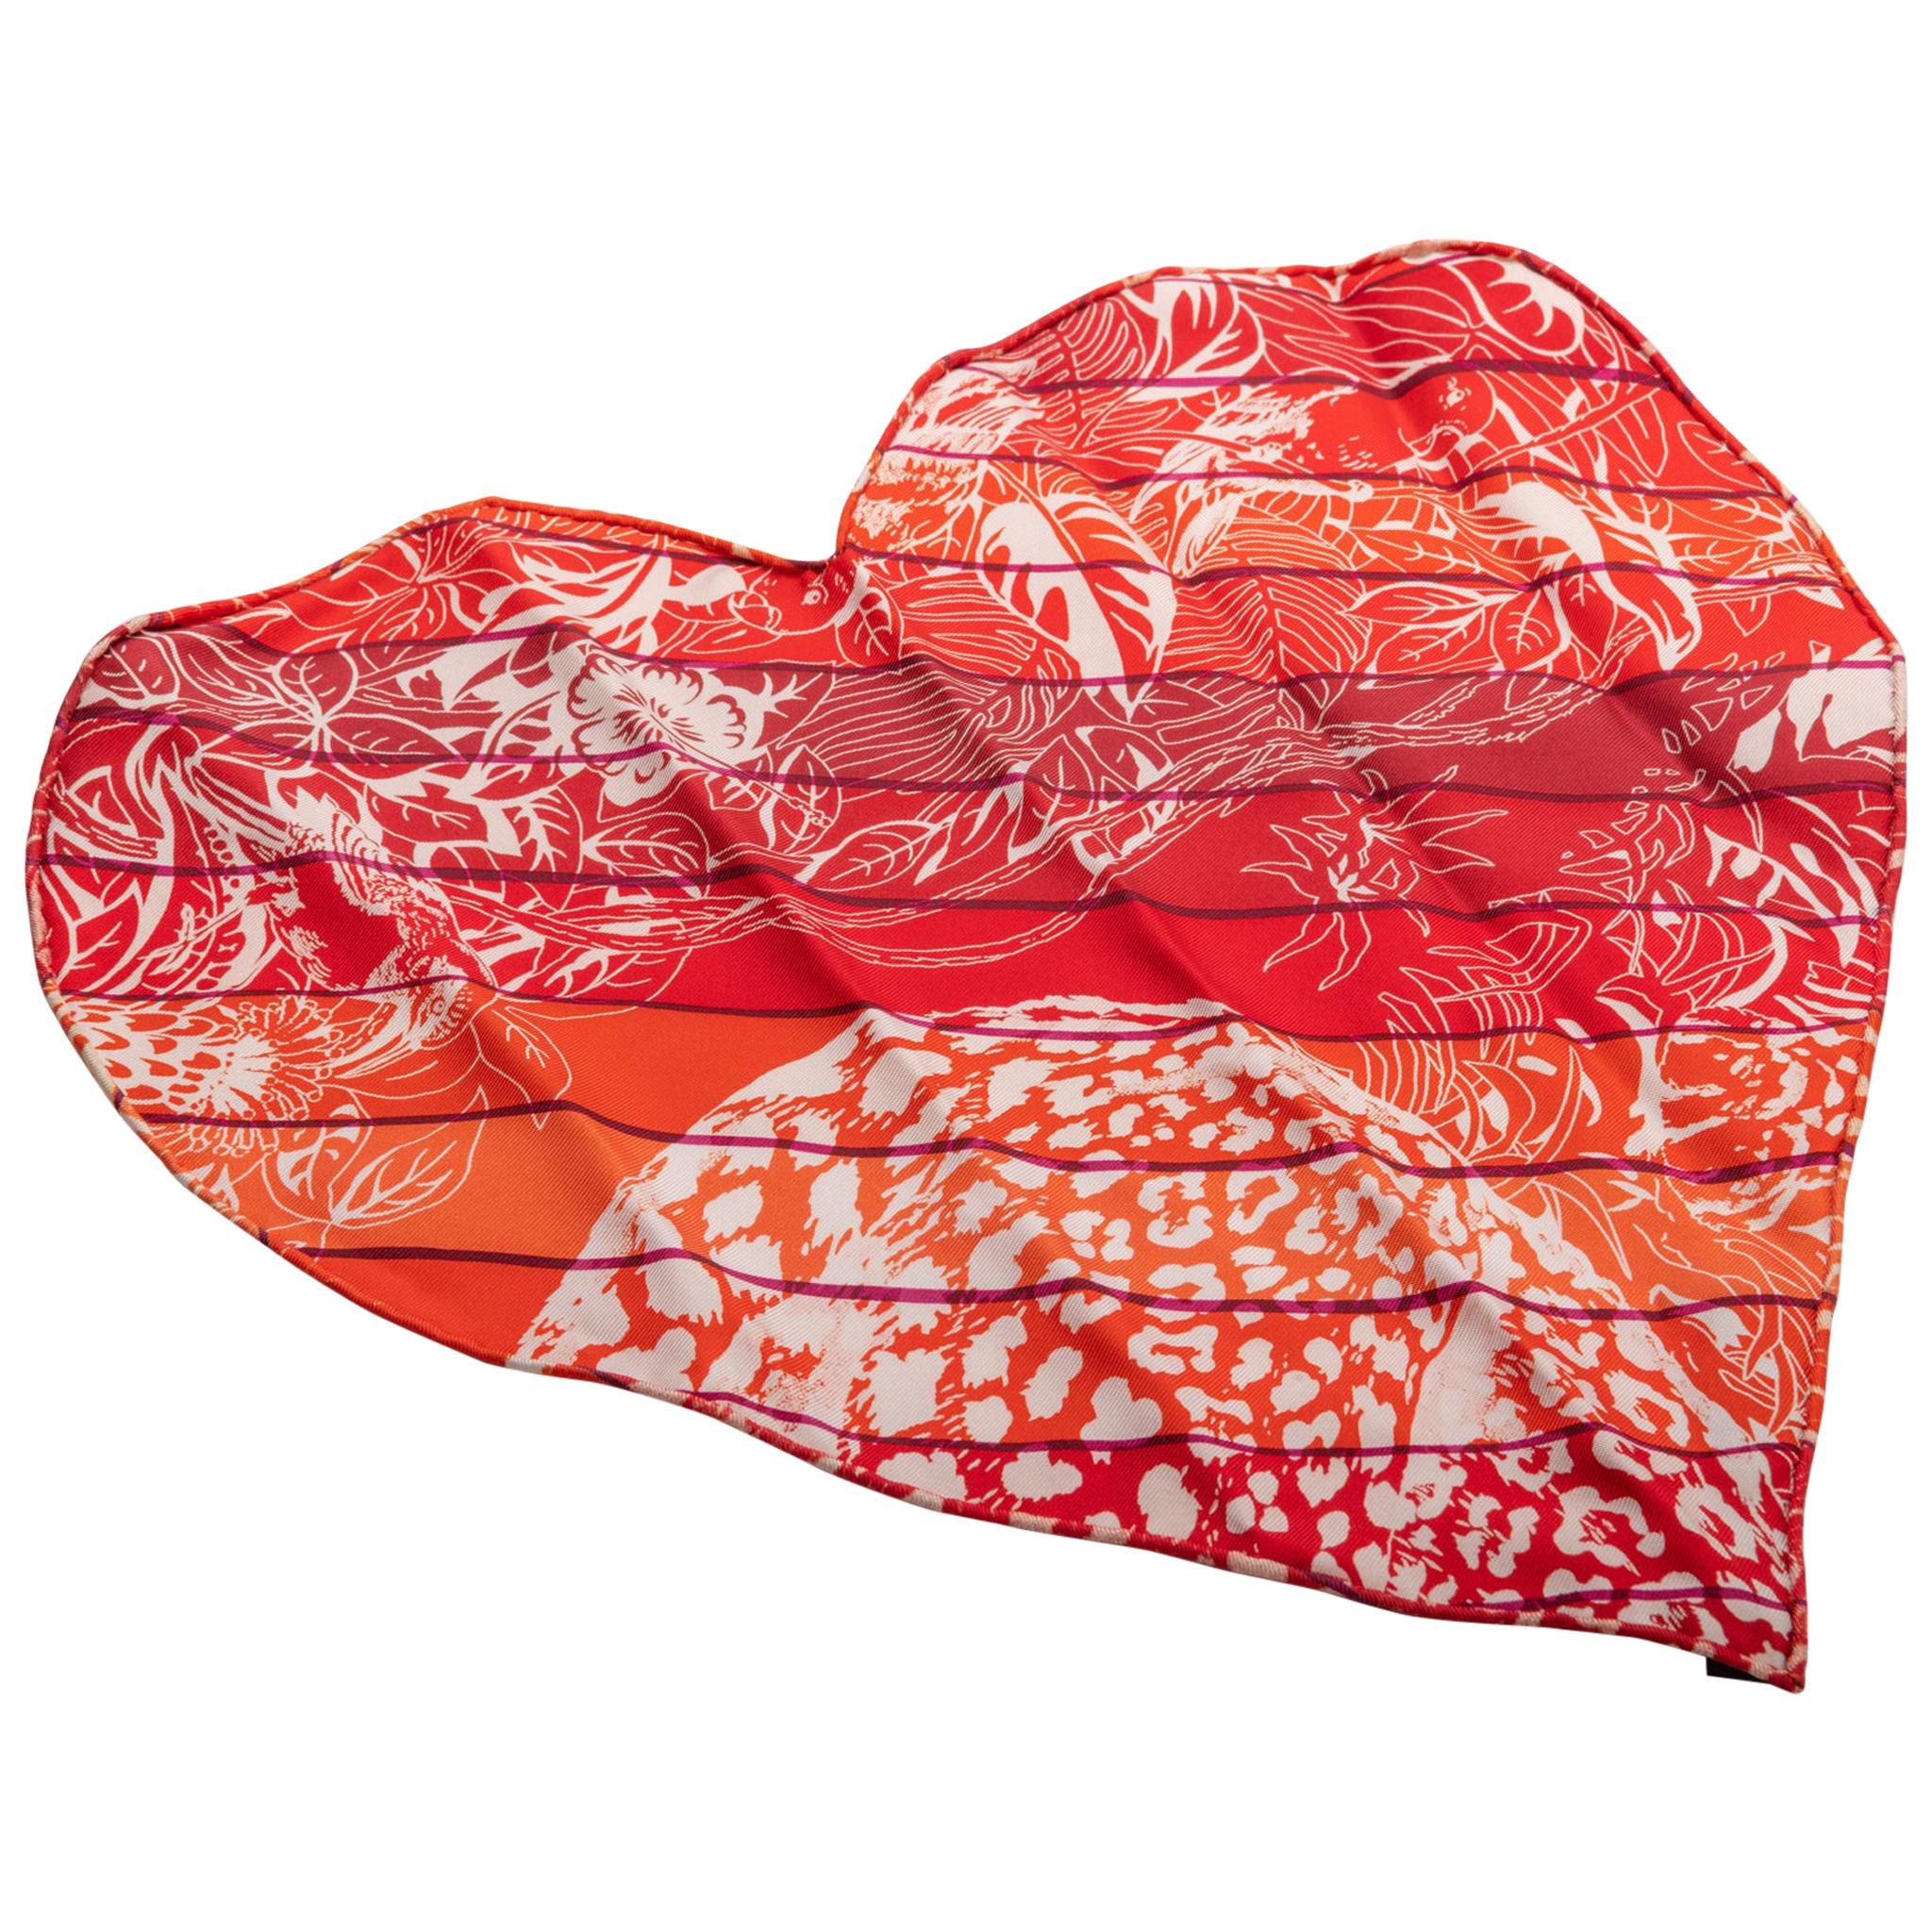 New Hermes Limited Edition Dallet Heart Mini Scarf in Box